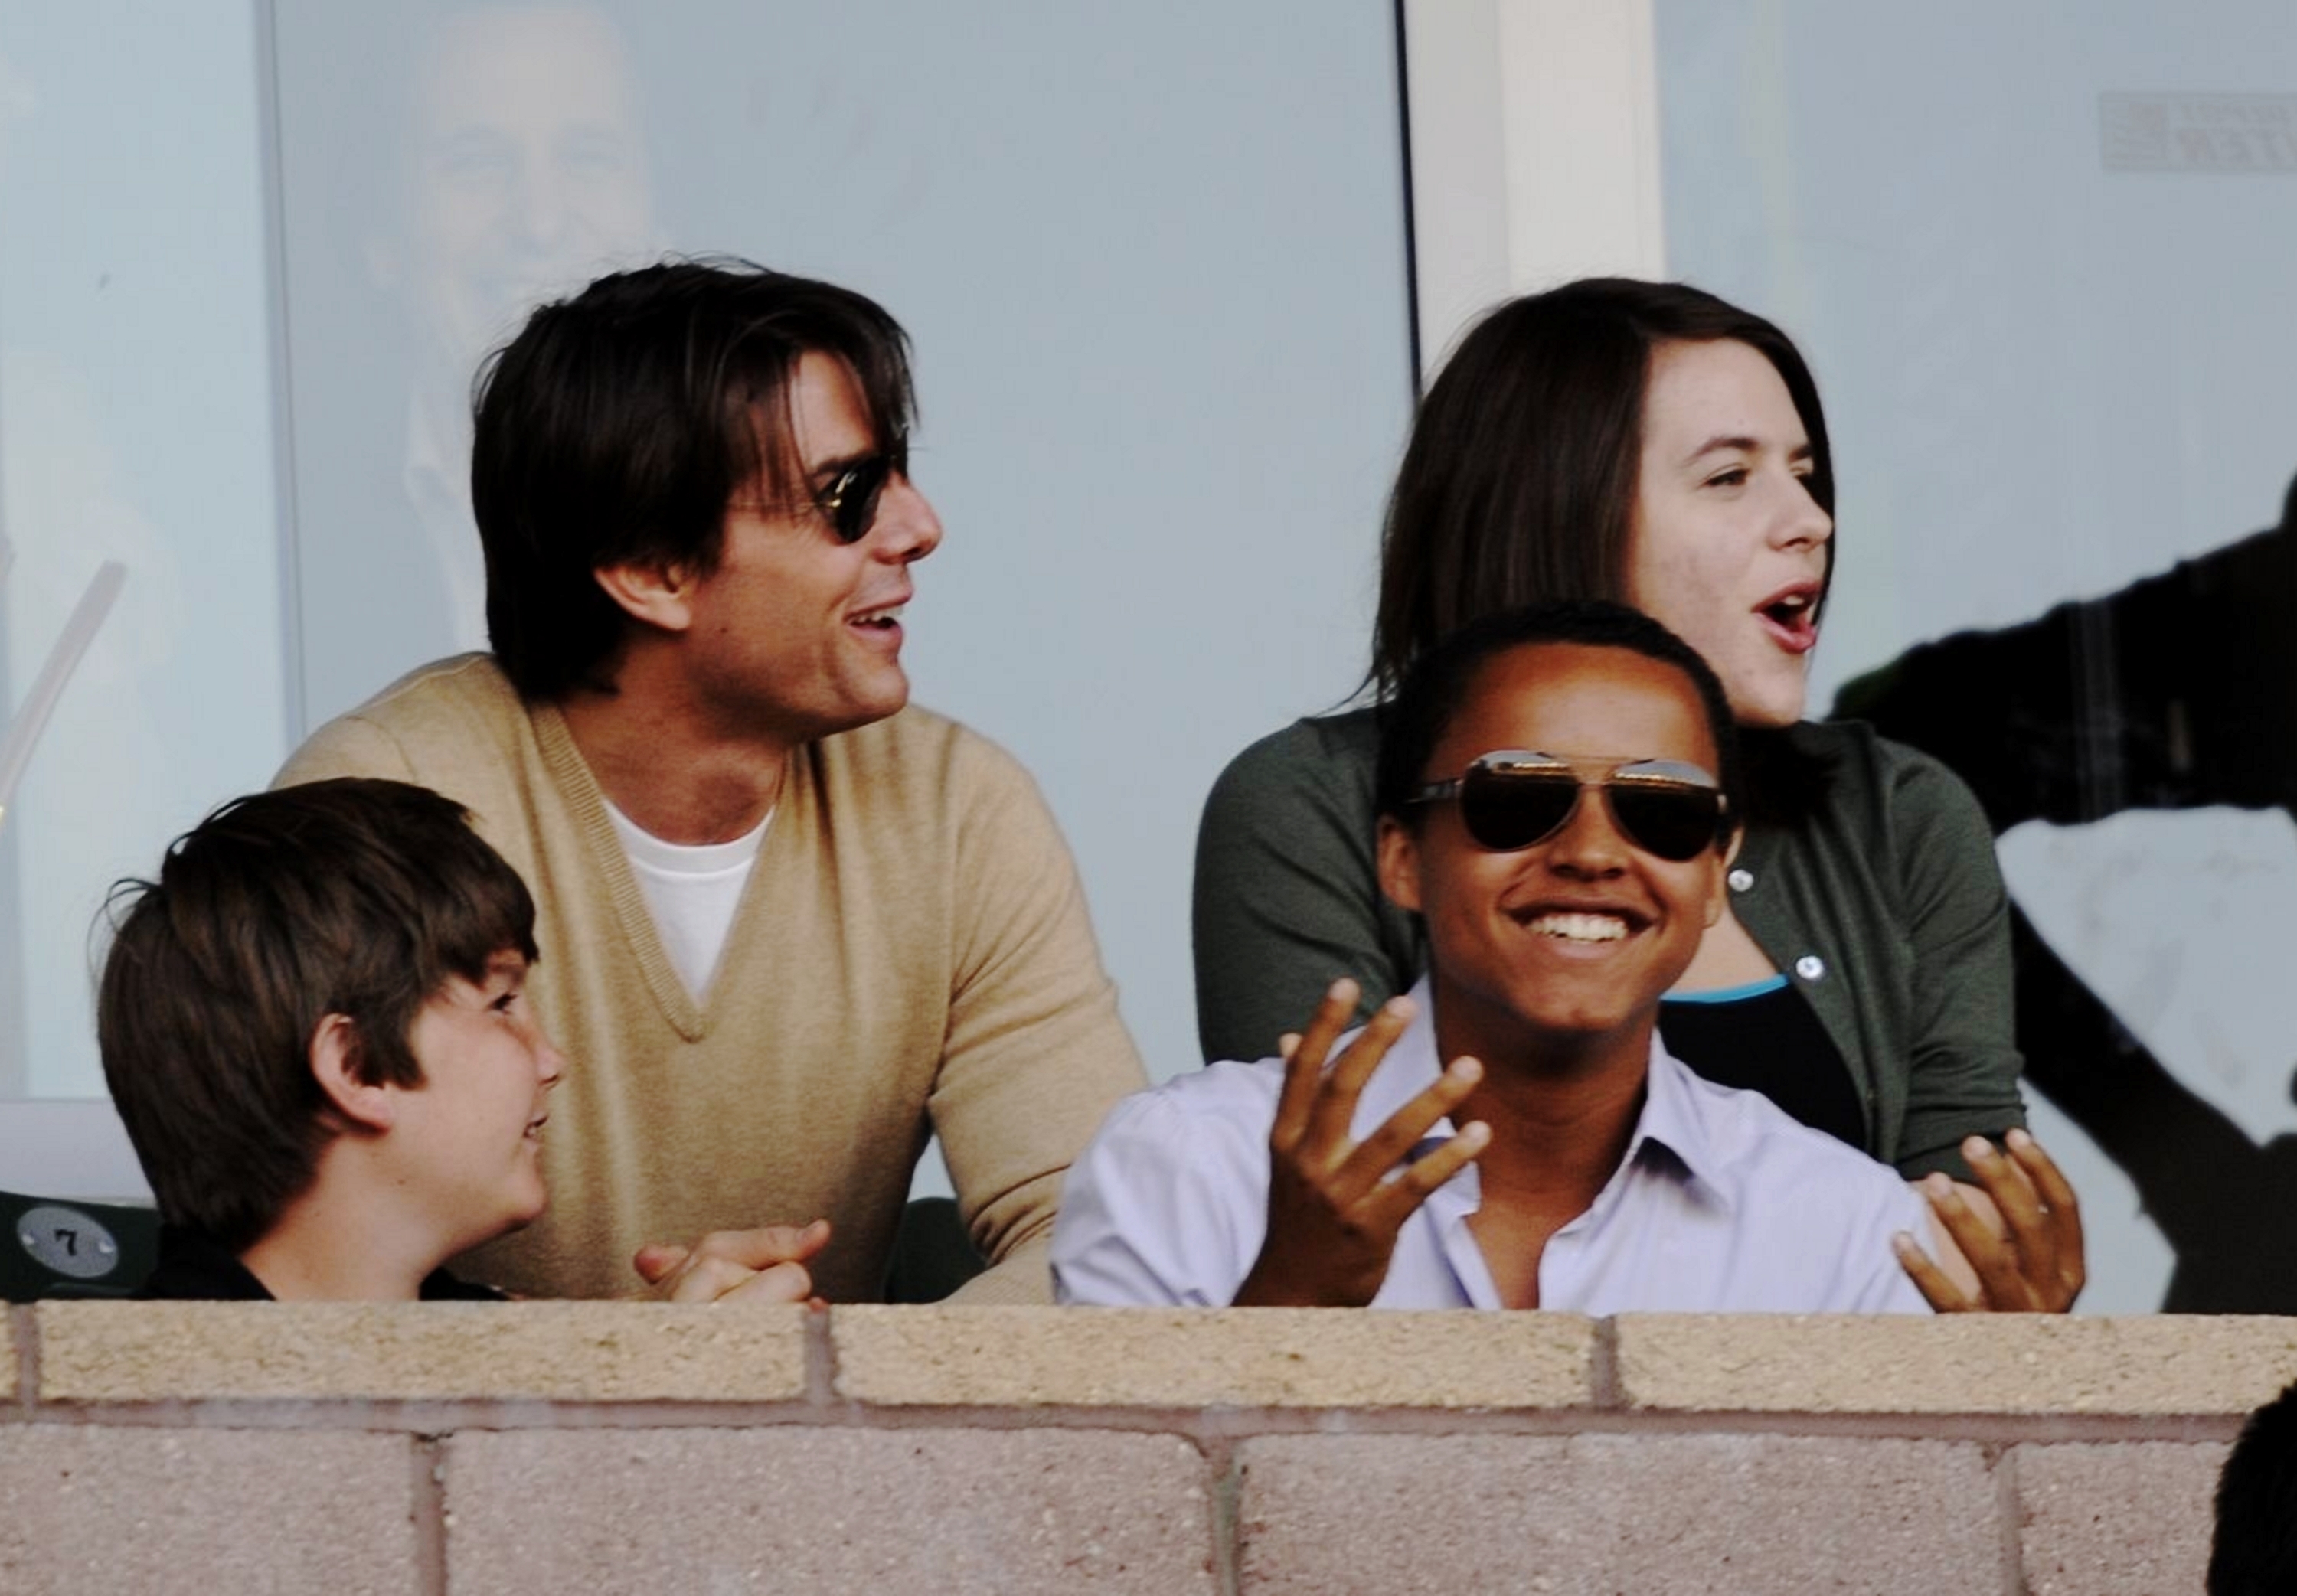 Tom Cruise enjoying a sports event with Connor and Isabella Cruise. Tom is in a casual sweater, sunglasses, and is smiling and interacting with his children